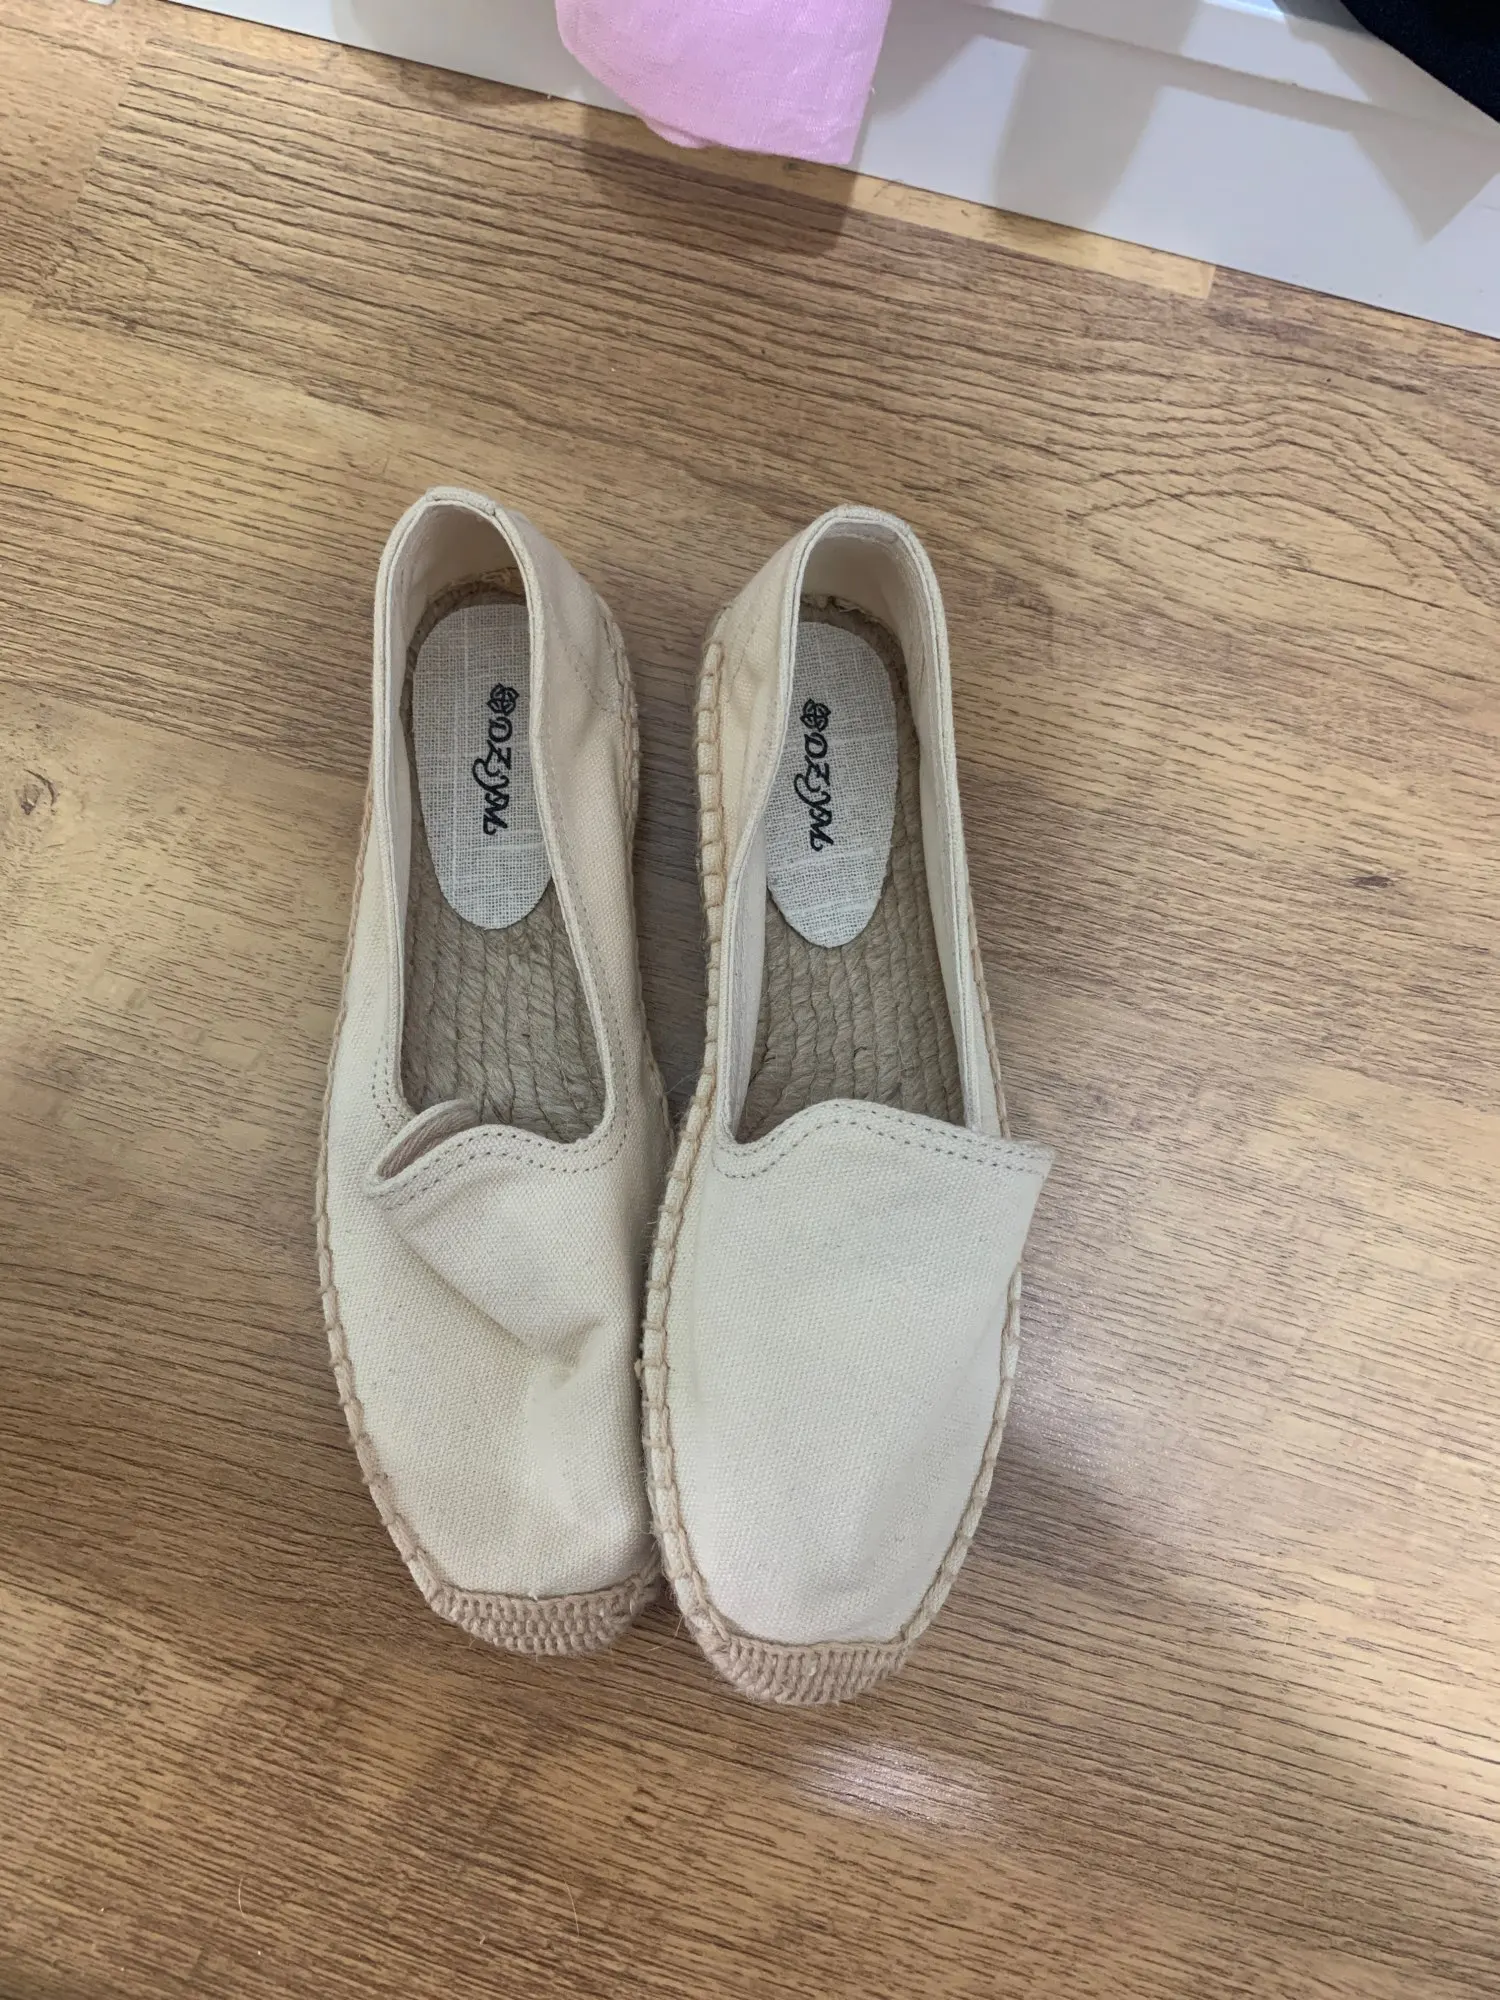 Espadrilles Women Flat Casual Shoes Rubber Summer ladies loafers Woman Slip On Flats Outdoor Breathable Loafers Autumn White